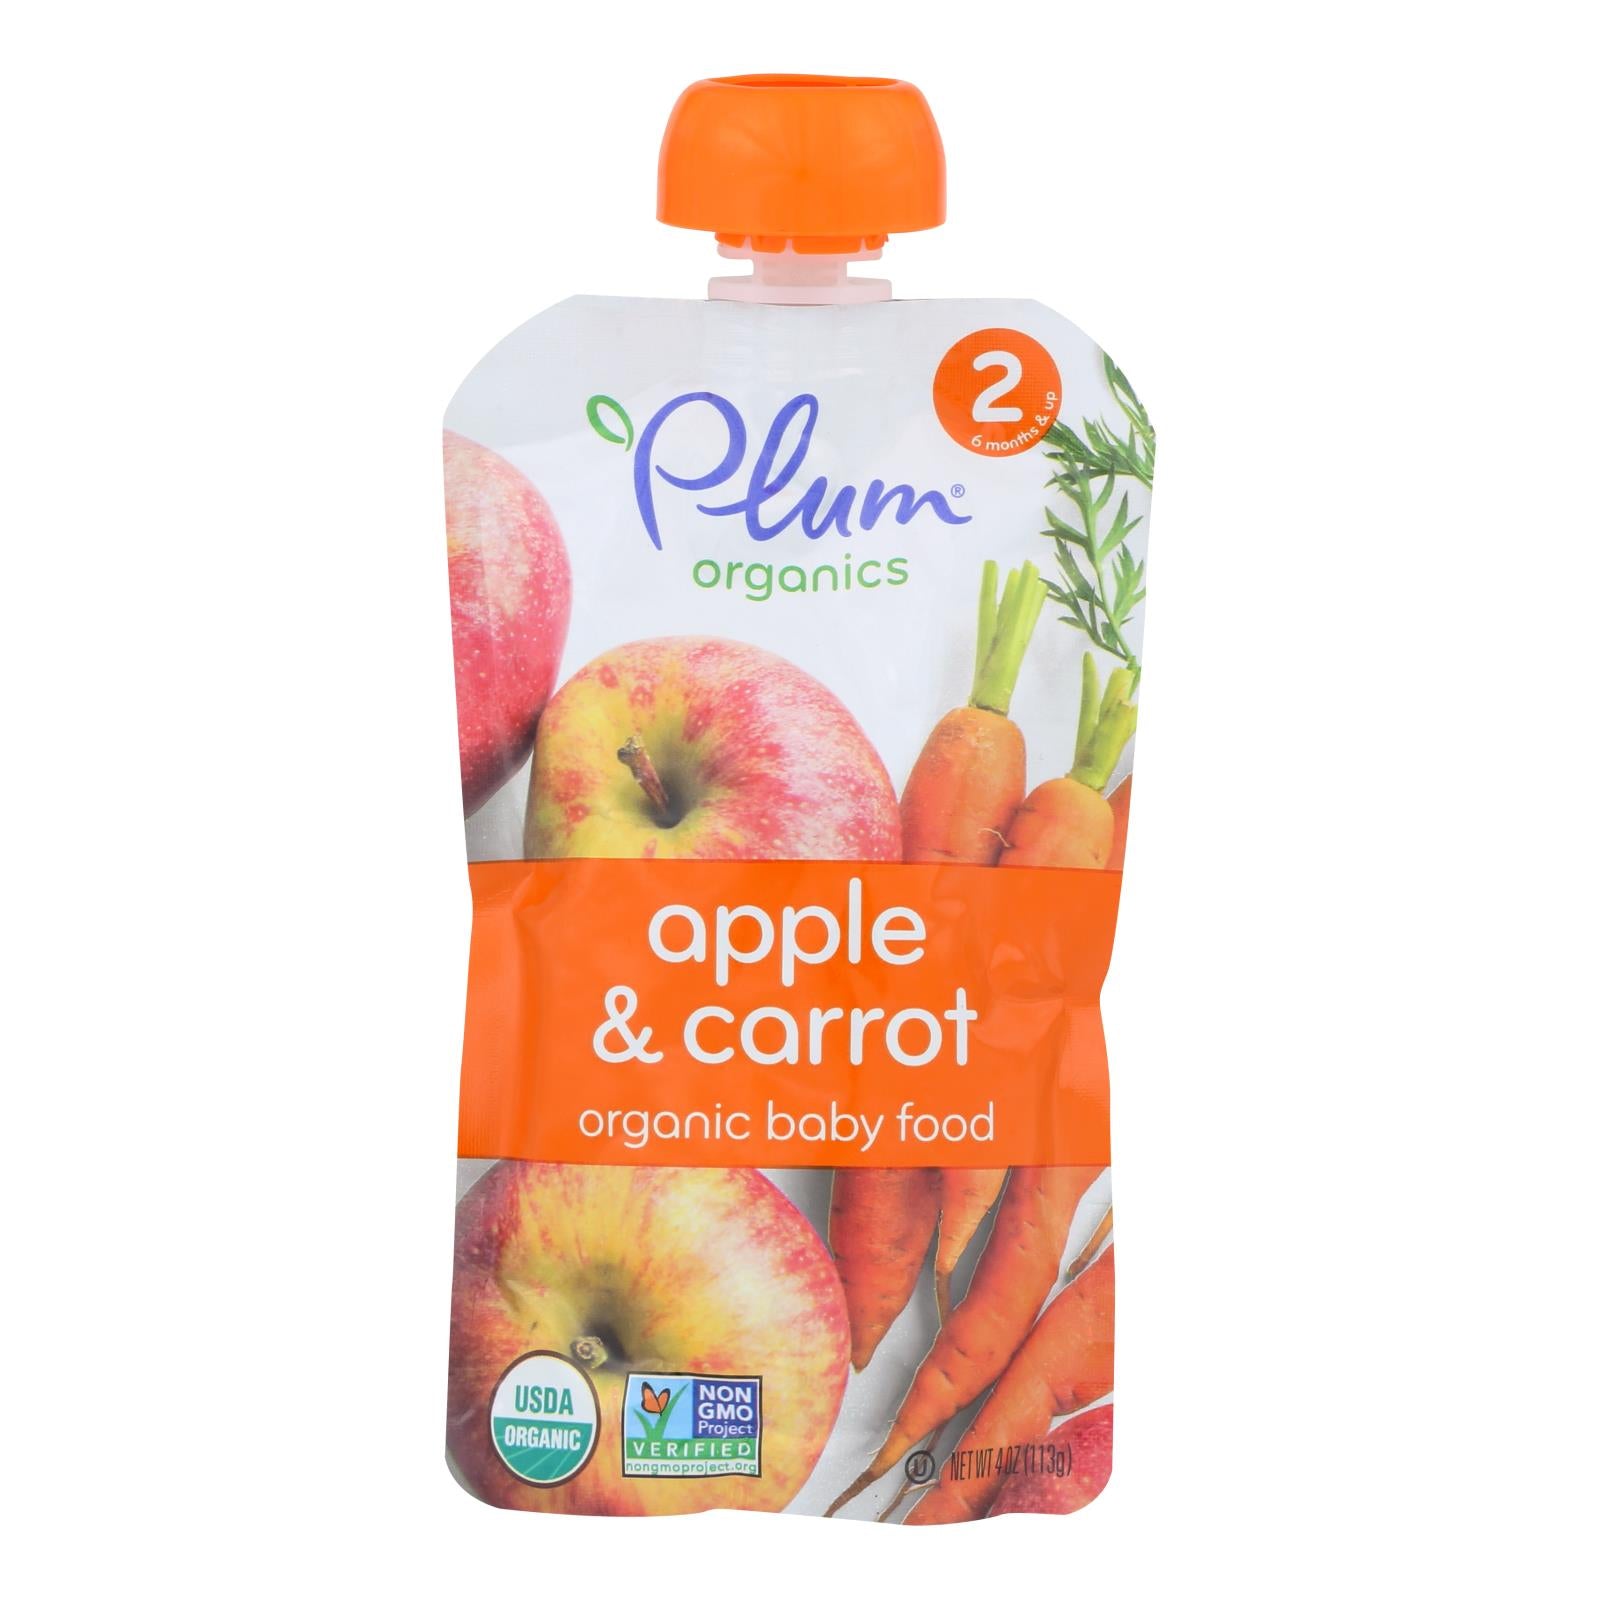 Plum Organics Baby Food - Organic -apple And Carrot - Stage 2 - 6 Months And Up - 3.5 .oz - Case Of 6 - Whole Green Foods